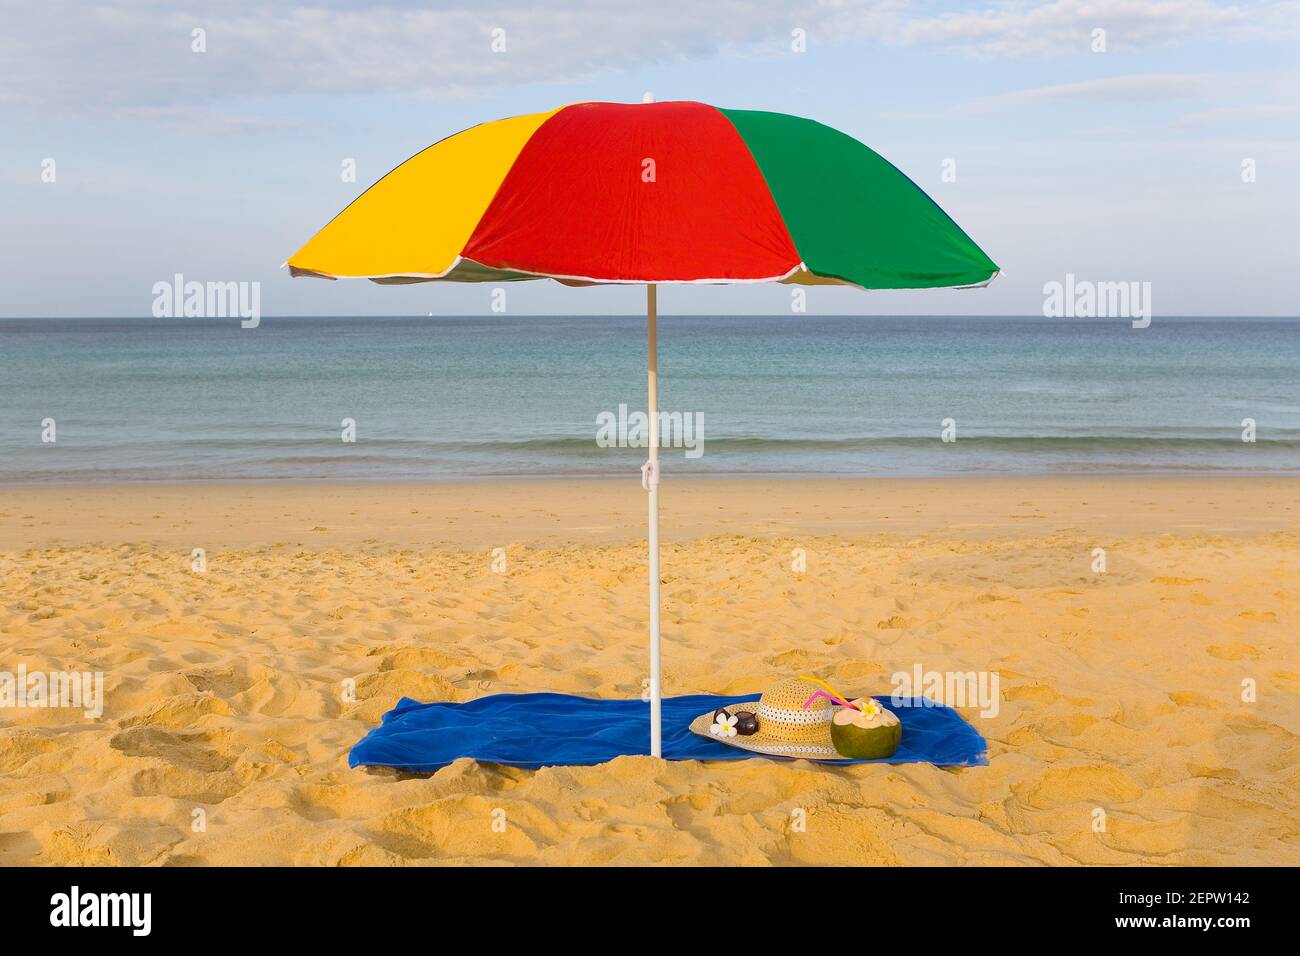 On the shore of a sandy beach under an umbrella lie sun glasses, a hat and a coconut fruit. Resort. Stock Photo